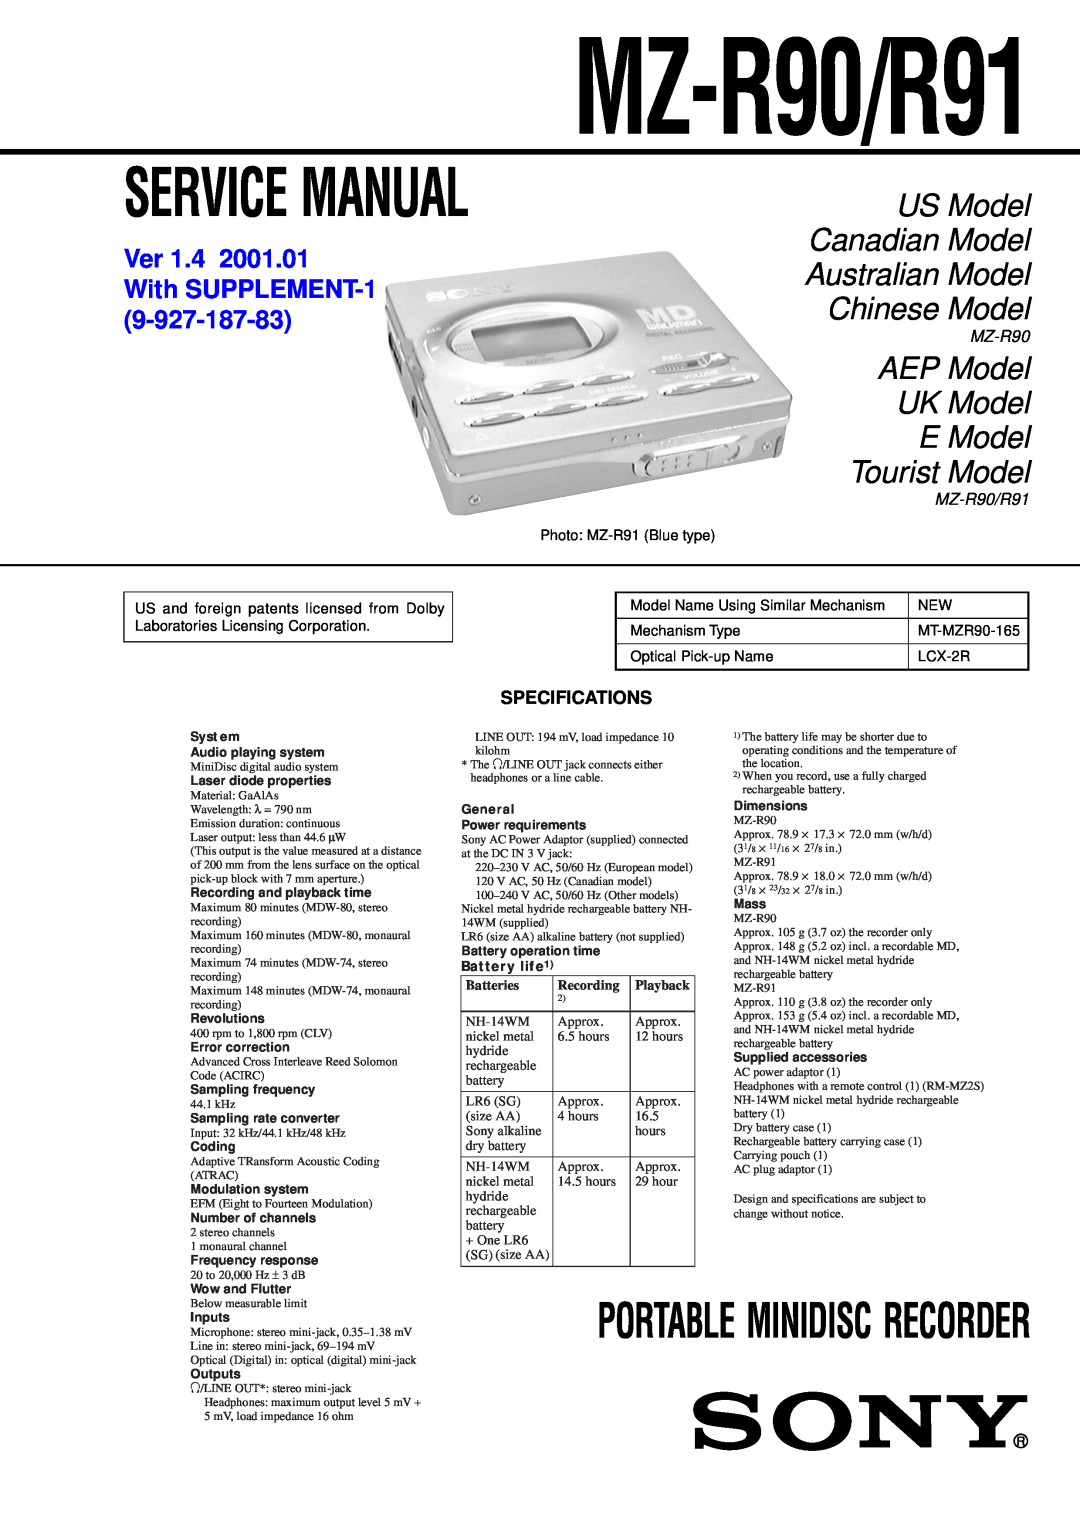 Sony MZ-R91 service manual US Model Canadian Model Australian Model, Chinese Model, Ver, MZ-R90/R91, With SUPPLEMENT-1 